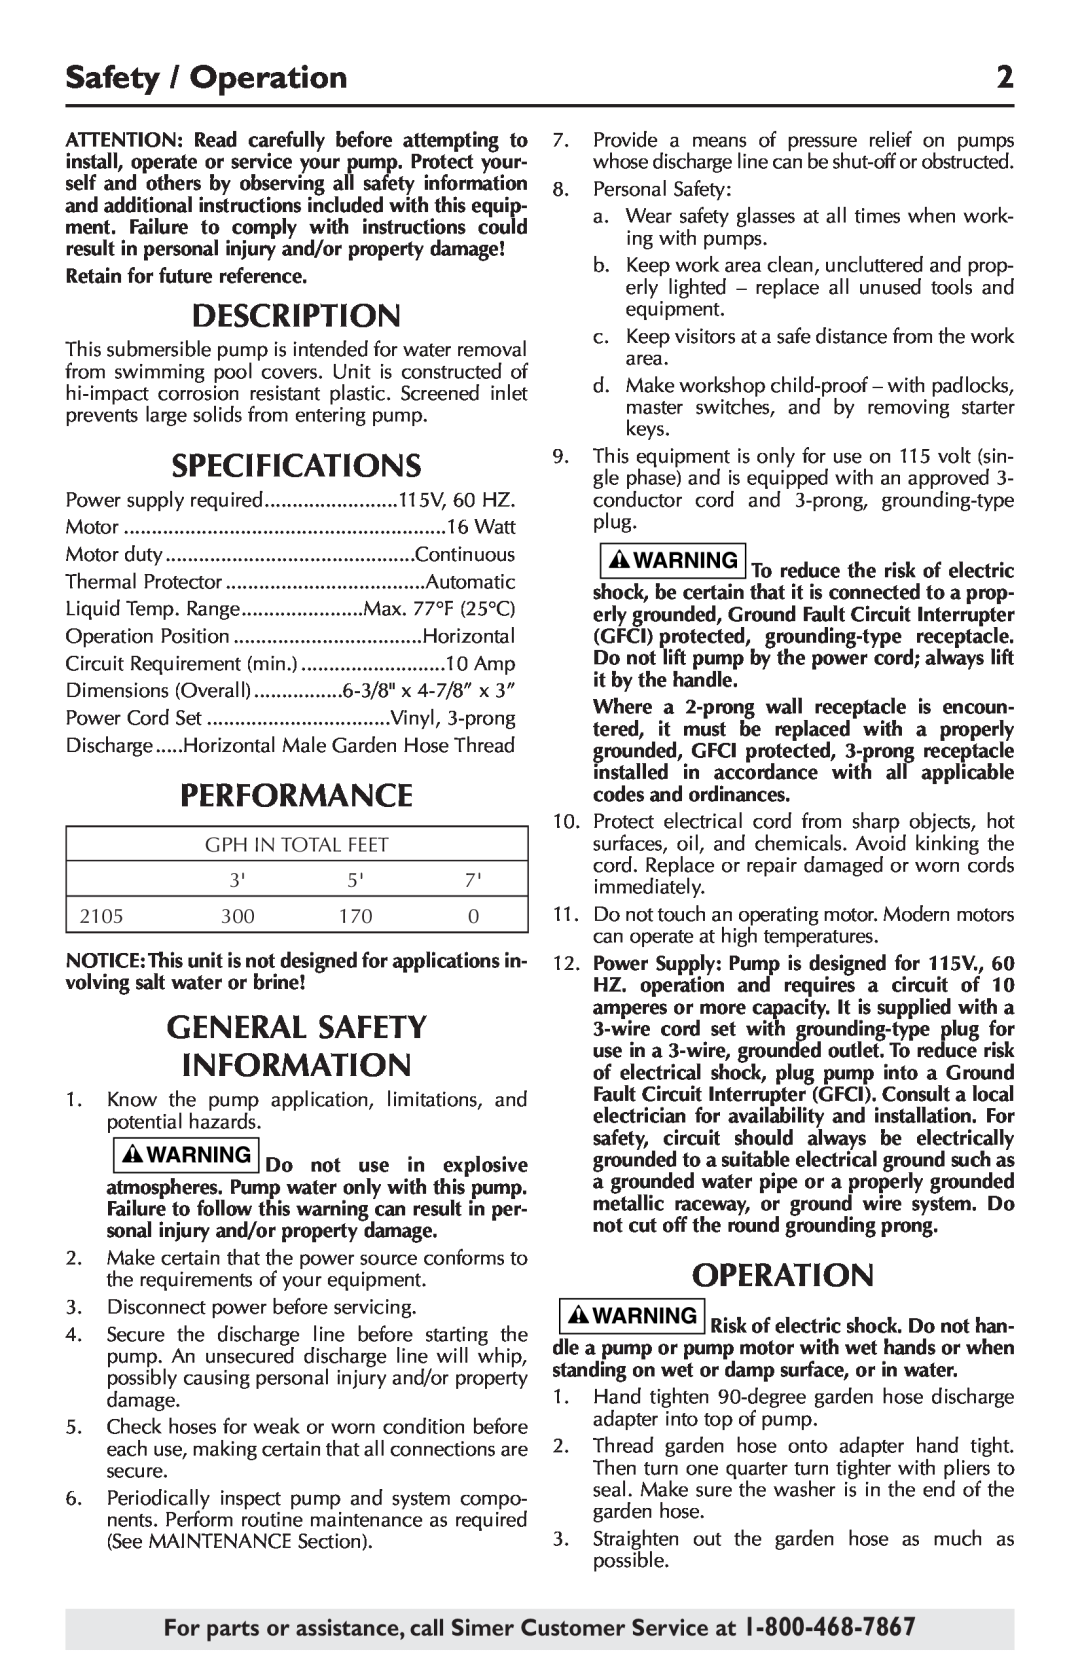 Simer Pumps 2105 owner manual Safety / Operation, Description, Specifications, General Safety Information, Performance 